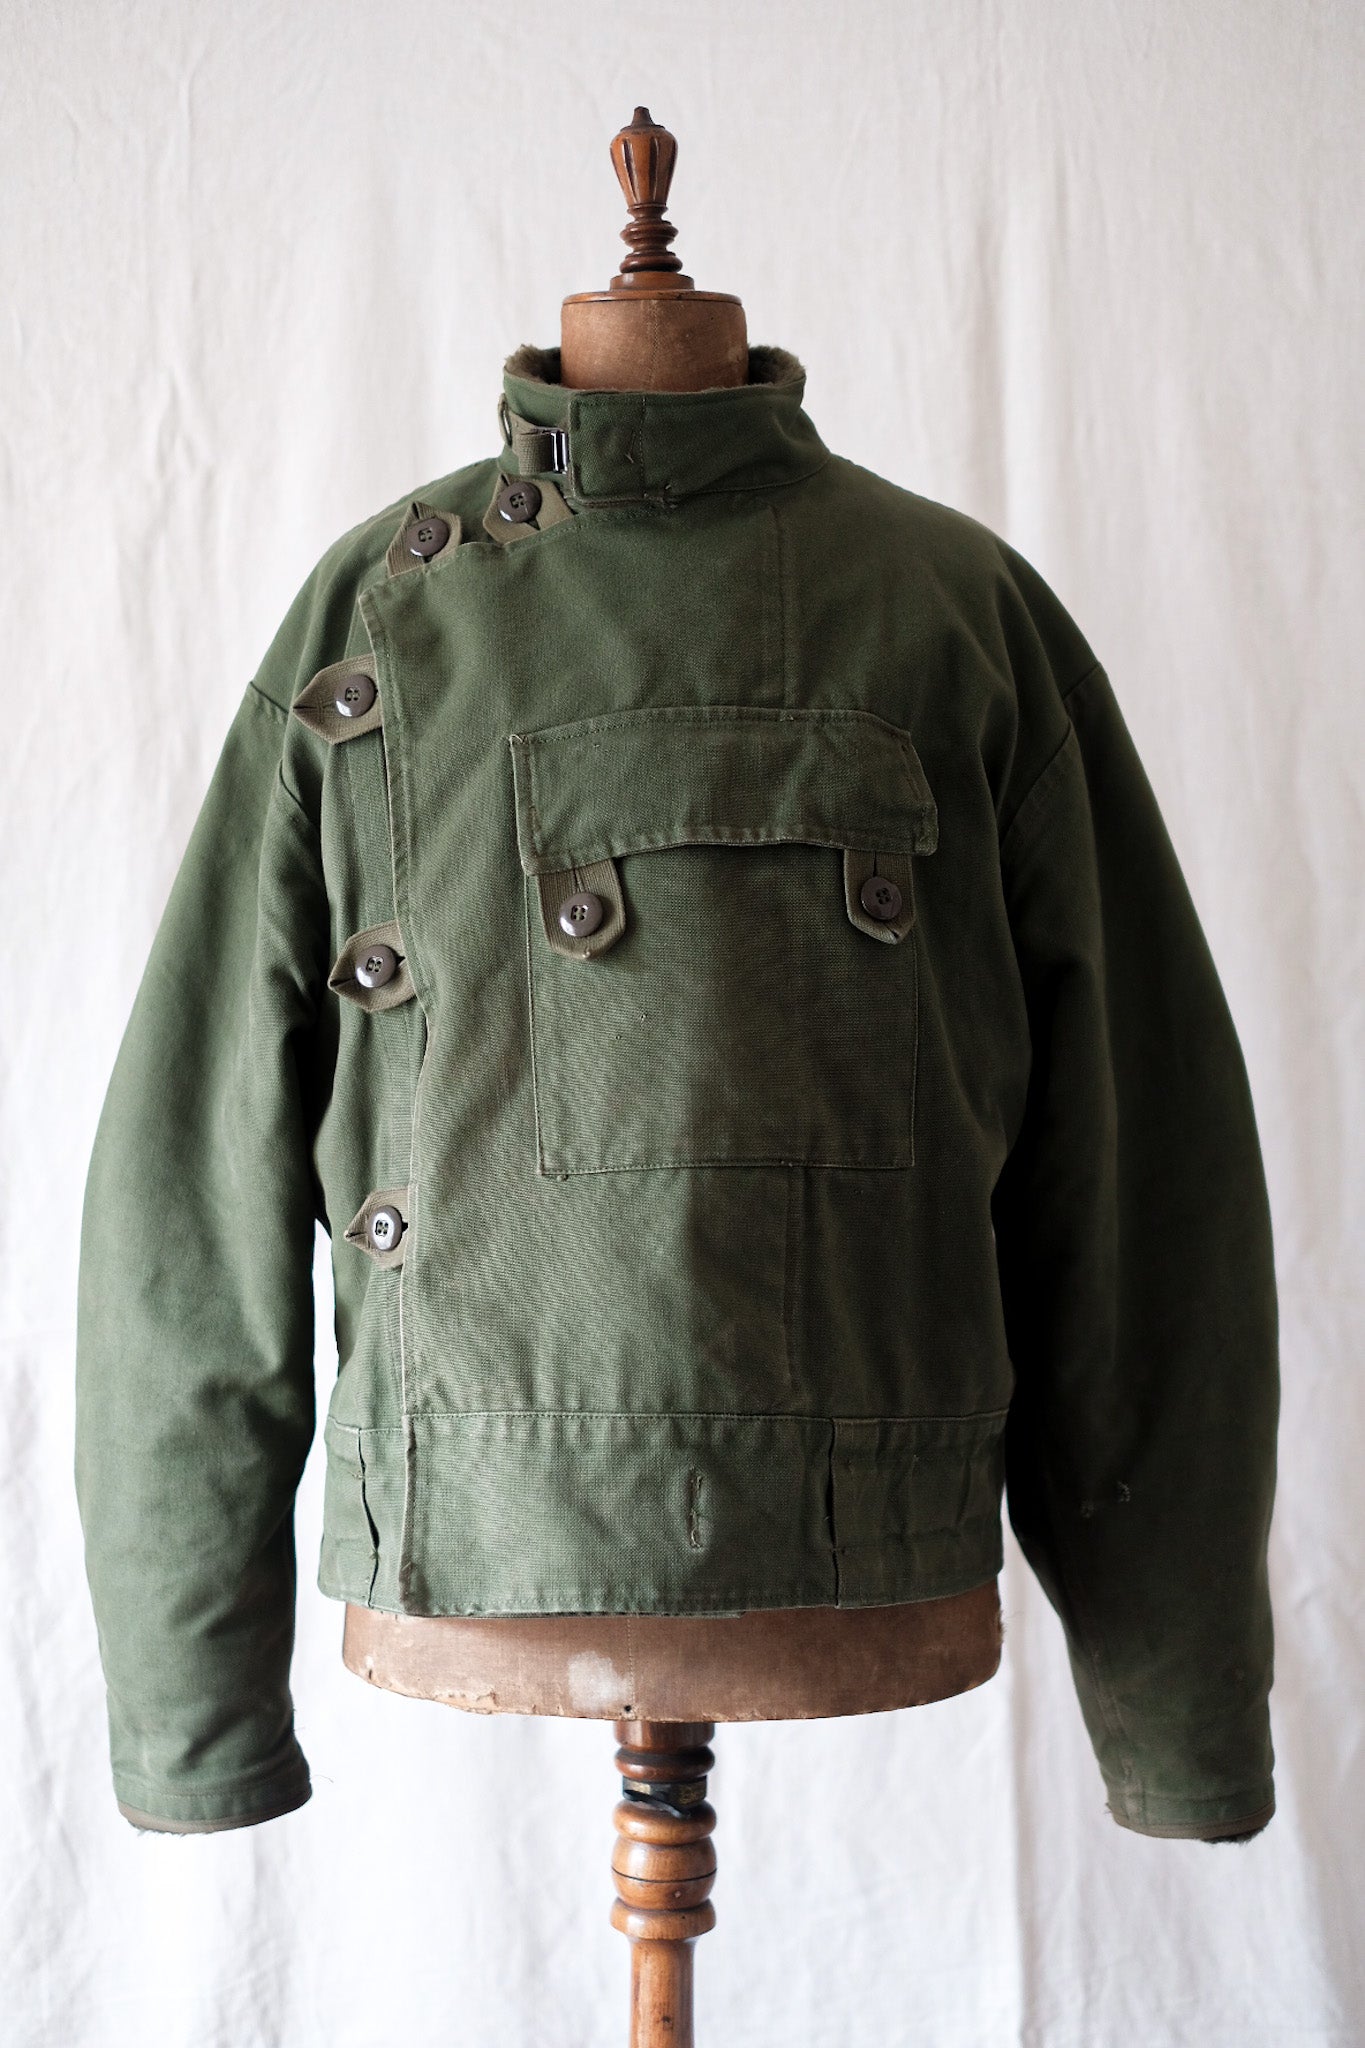 [~ 60's] Swedish Army Dispatch Rider Motorcycle Jacket with Liner